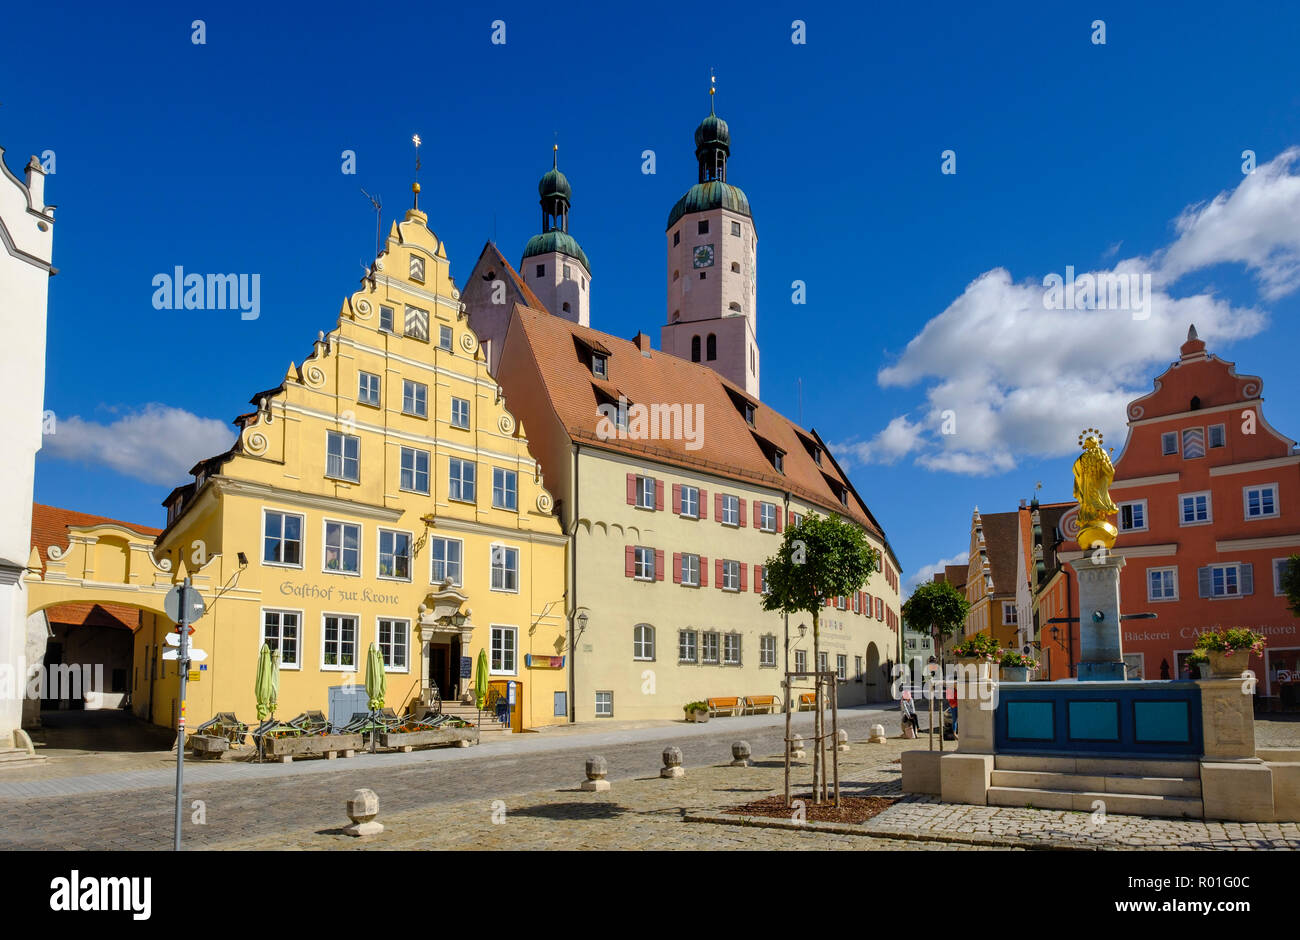 Market square and church towers of the parish church St. Emmeram, Wemding, Donau-Ries district, Swabia, Bavaria, Germany Stock Photo